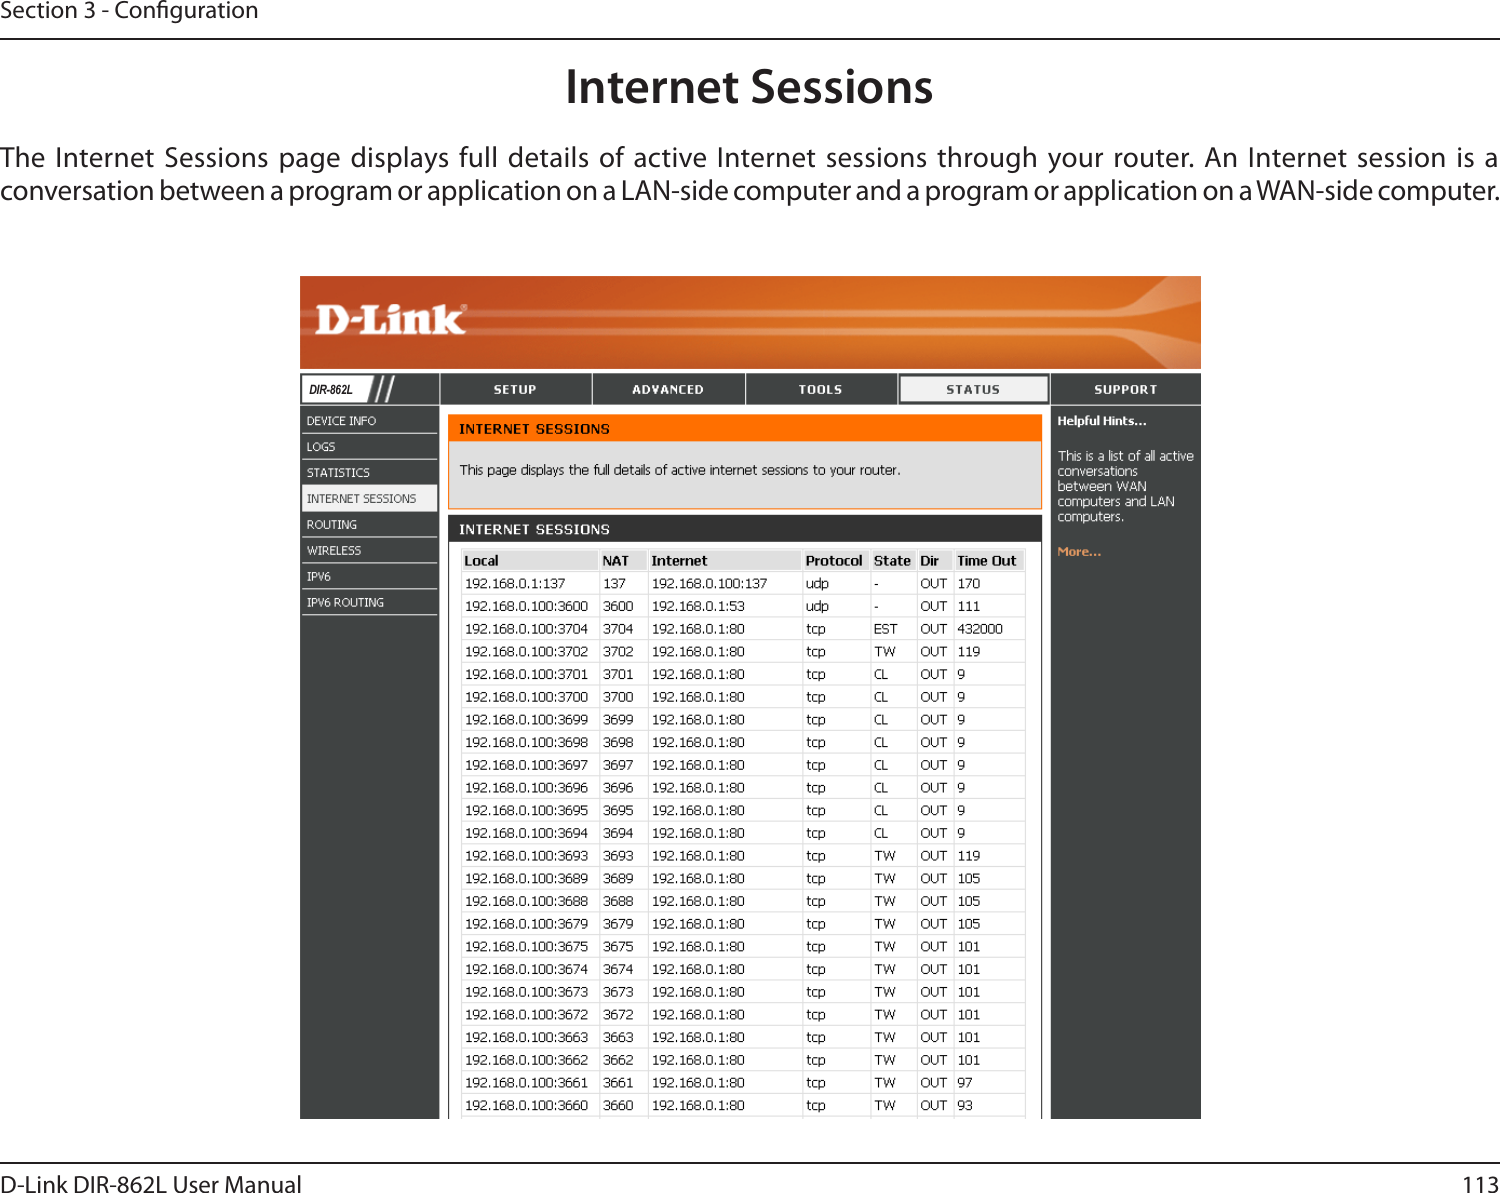 113D-Link DIR-862L User ManualSection 3 - CongurationInternet SessionsThe Internet Sessions page displays full details of active Internet sessions through your router. An Internet session is a conversation between a program or application on a LAN-side computer and a program or application on a WAN-side computer. DIR-862L